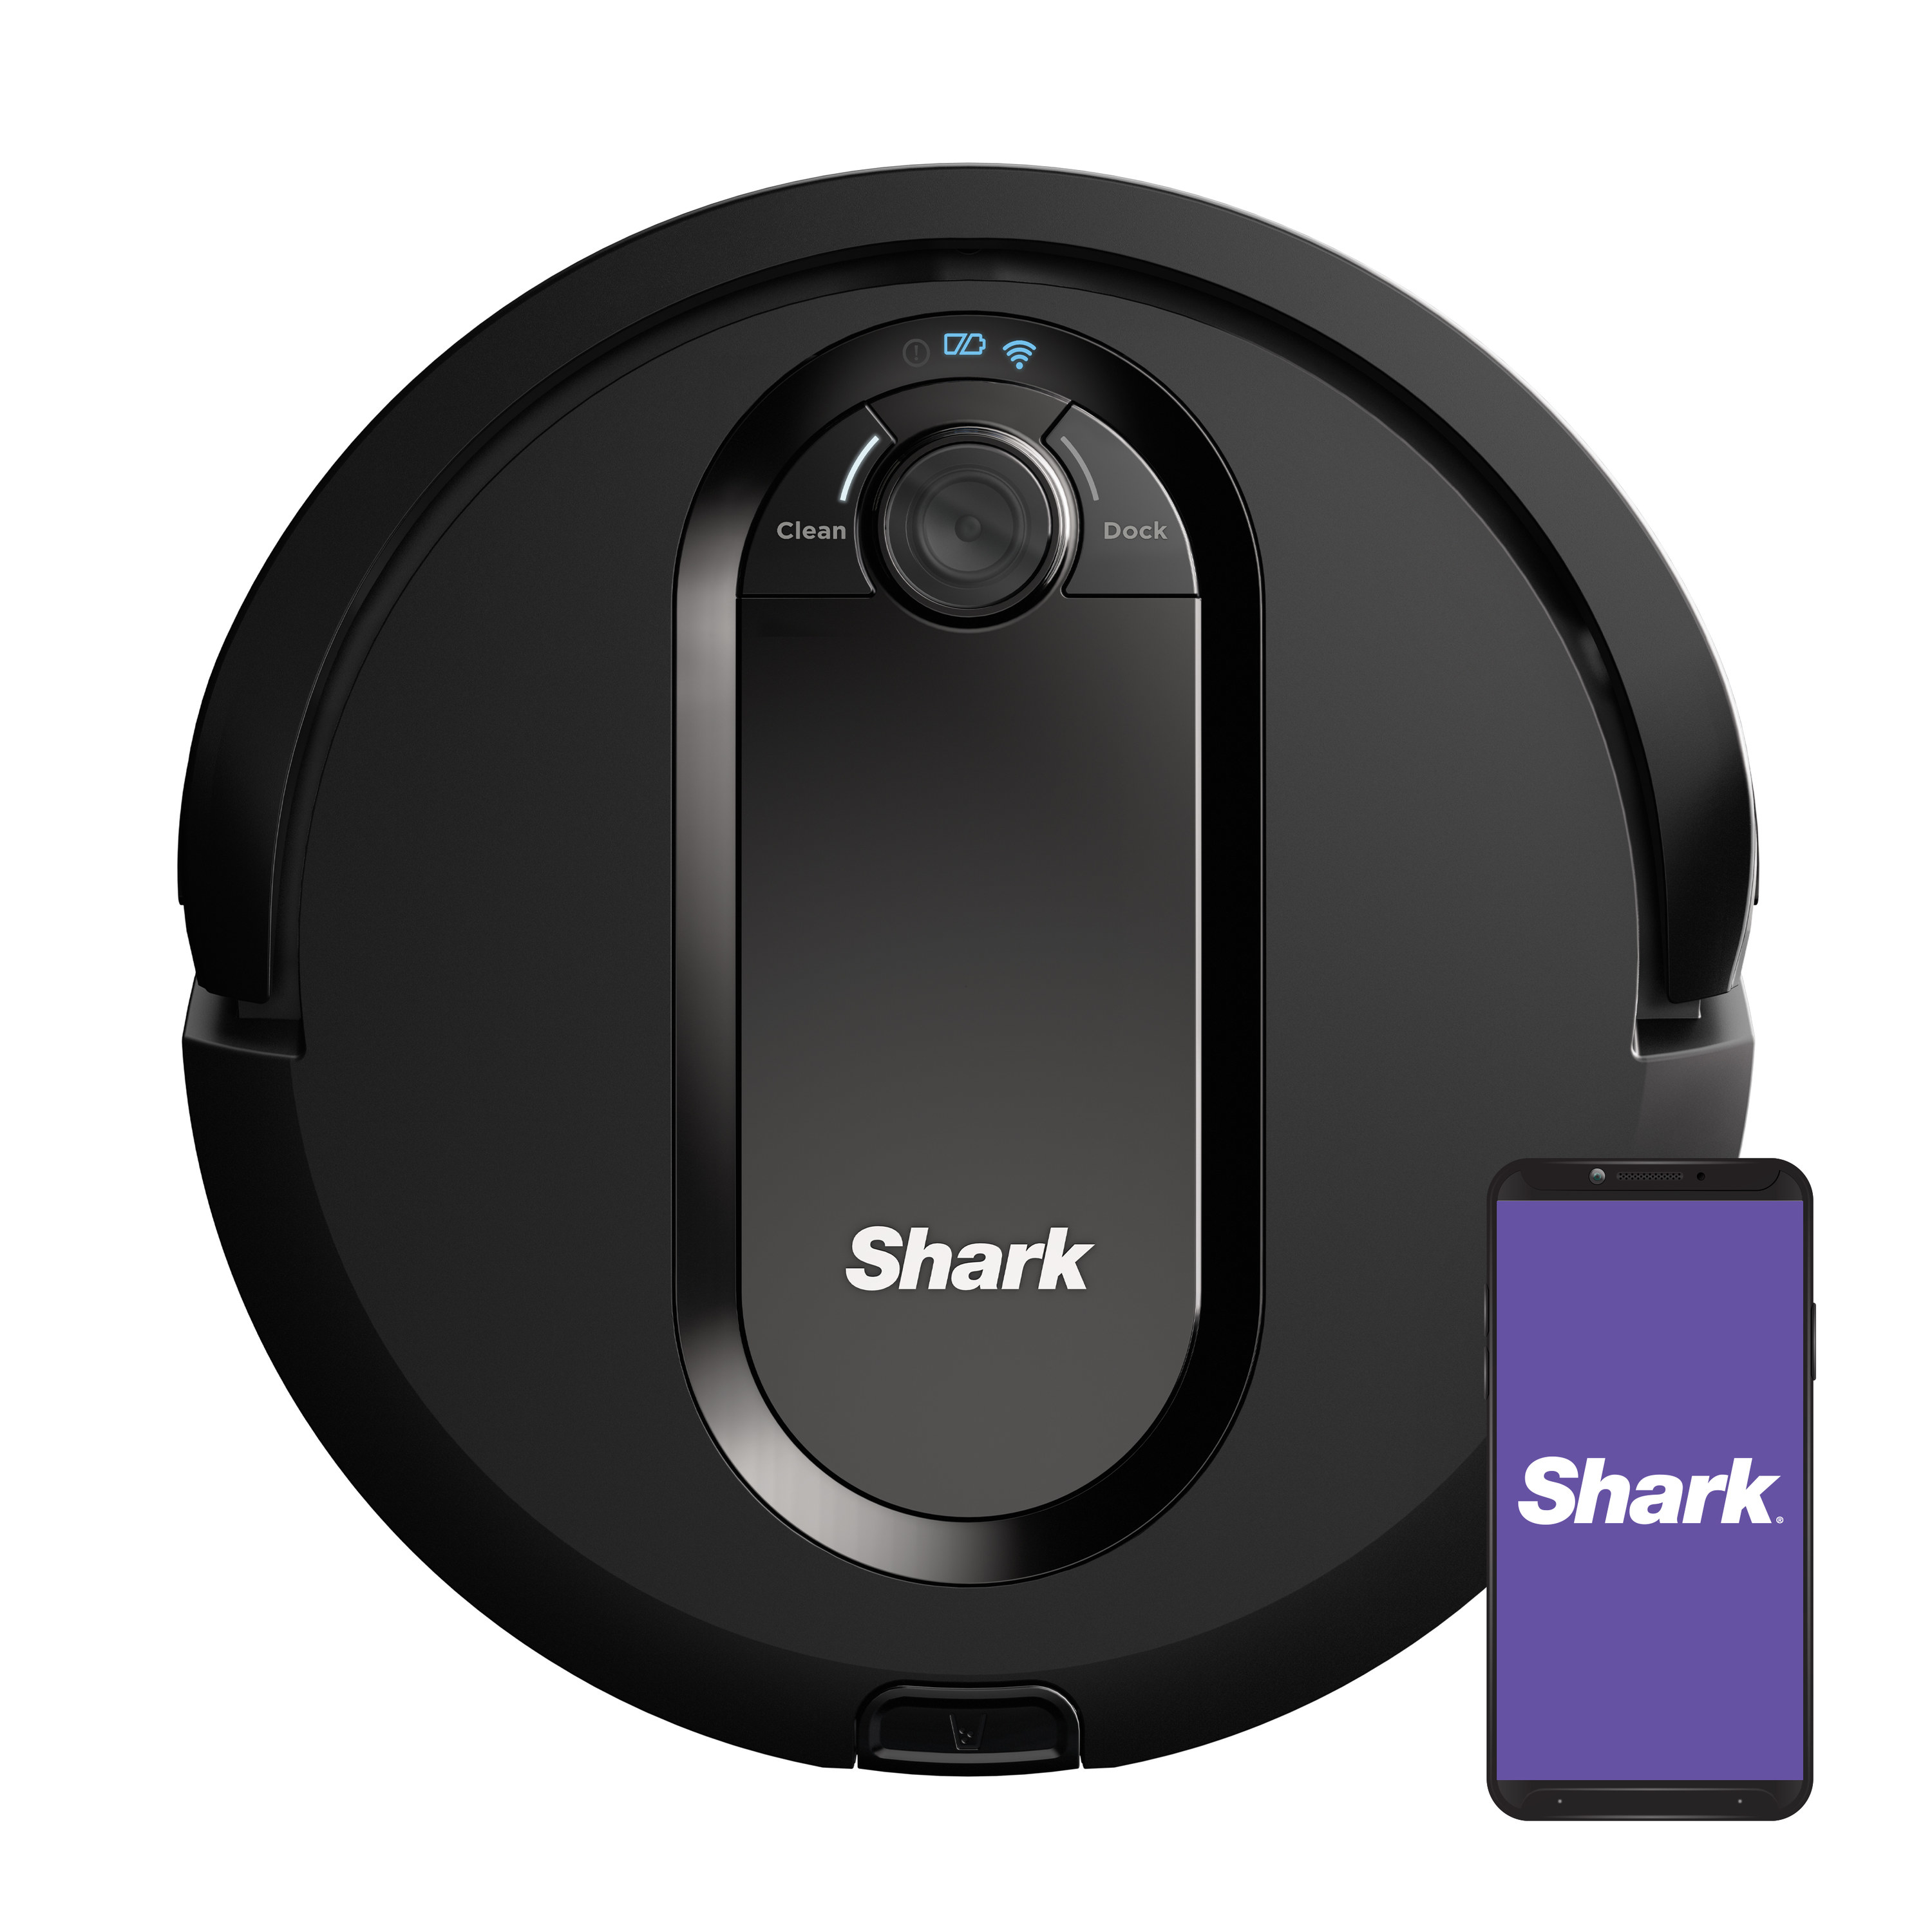 The black robot vacuum and a phone showing the app